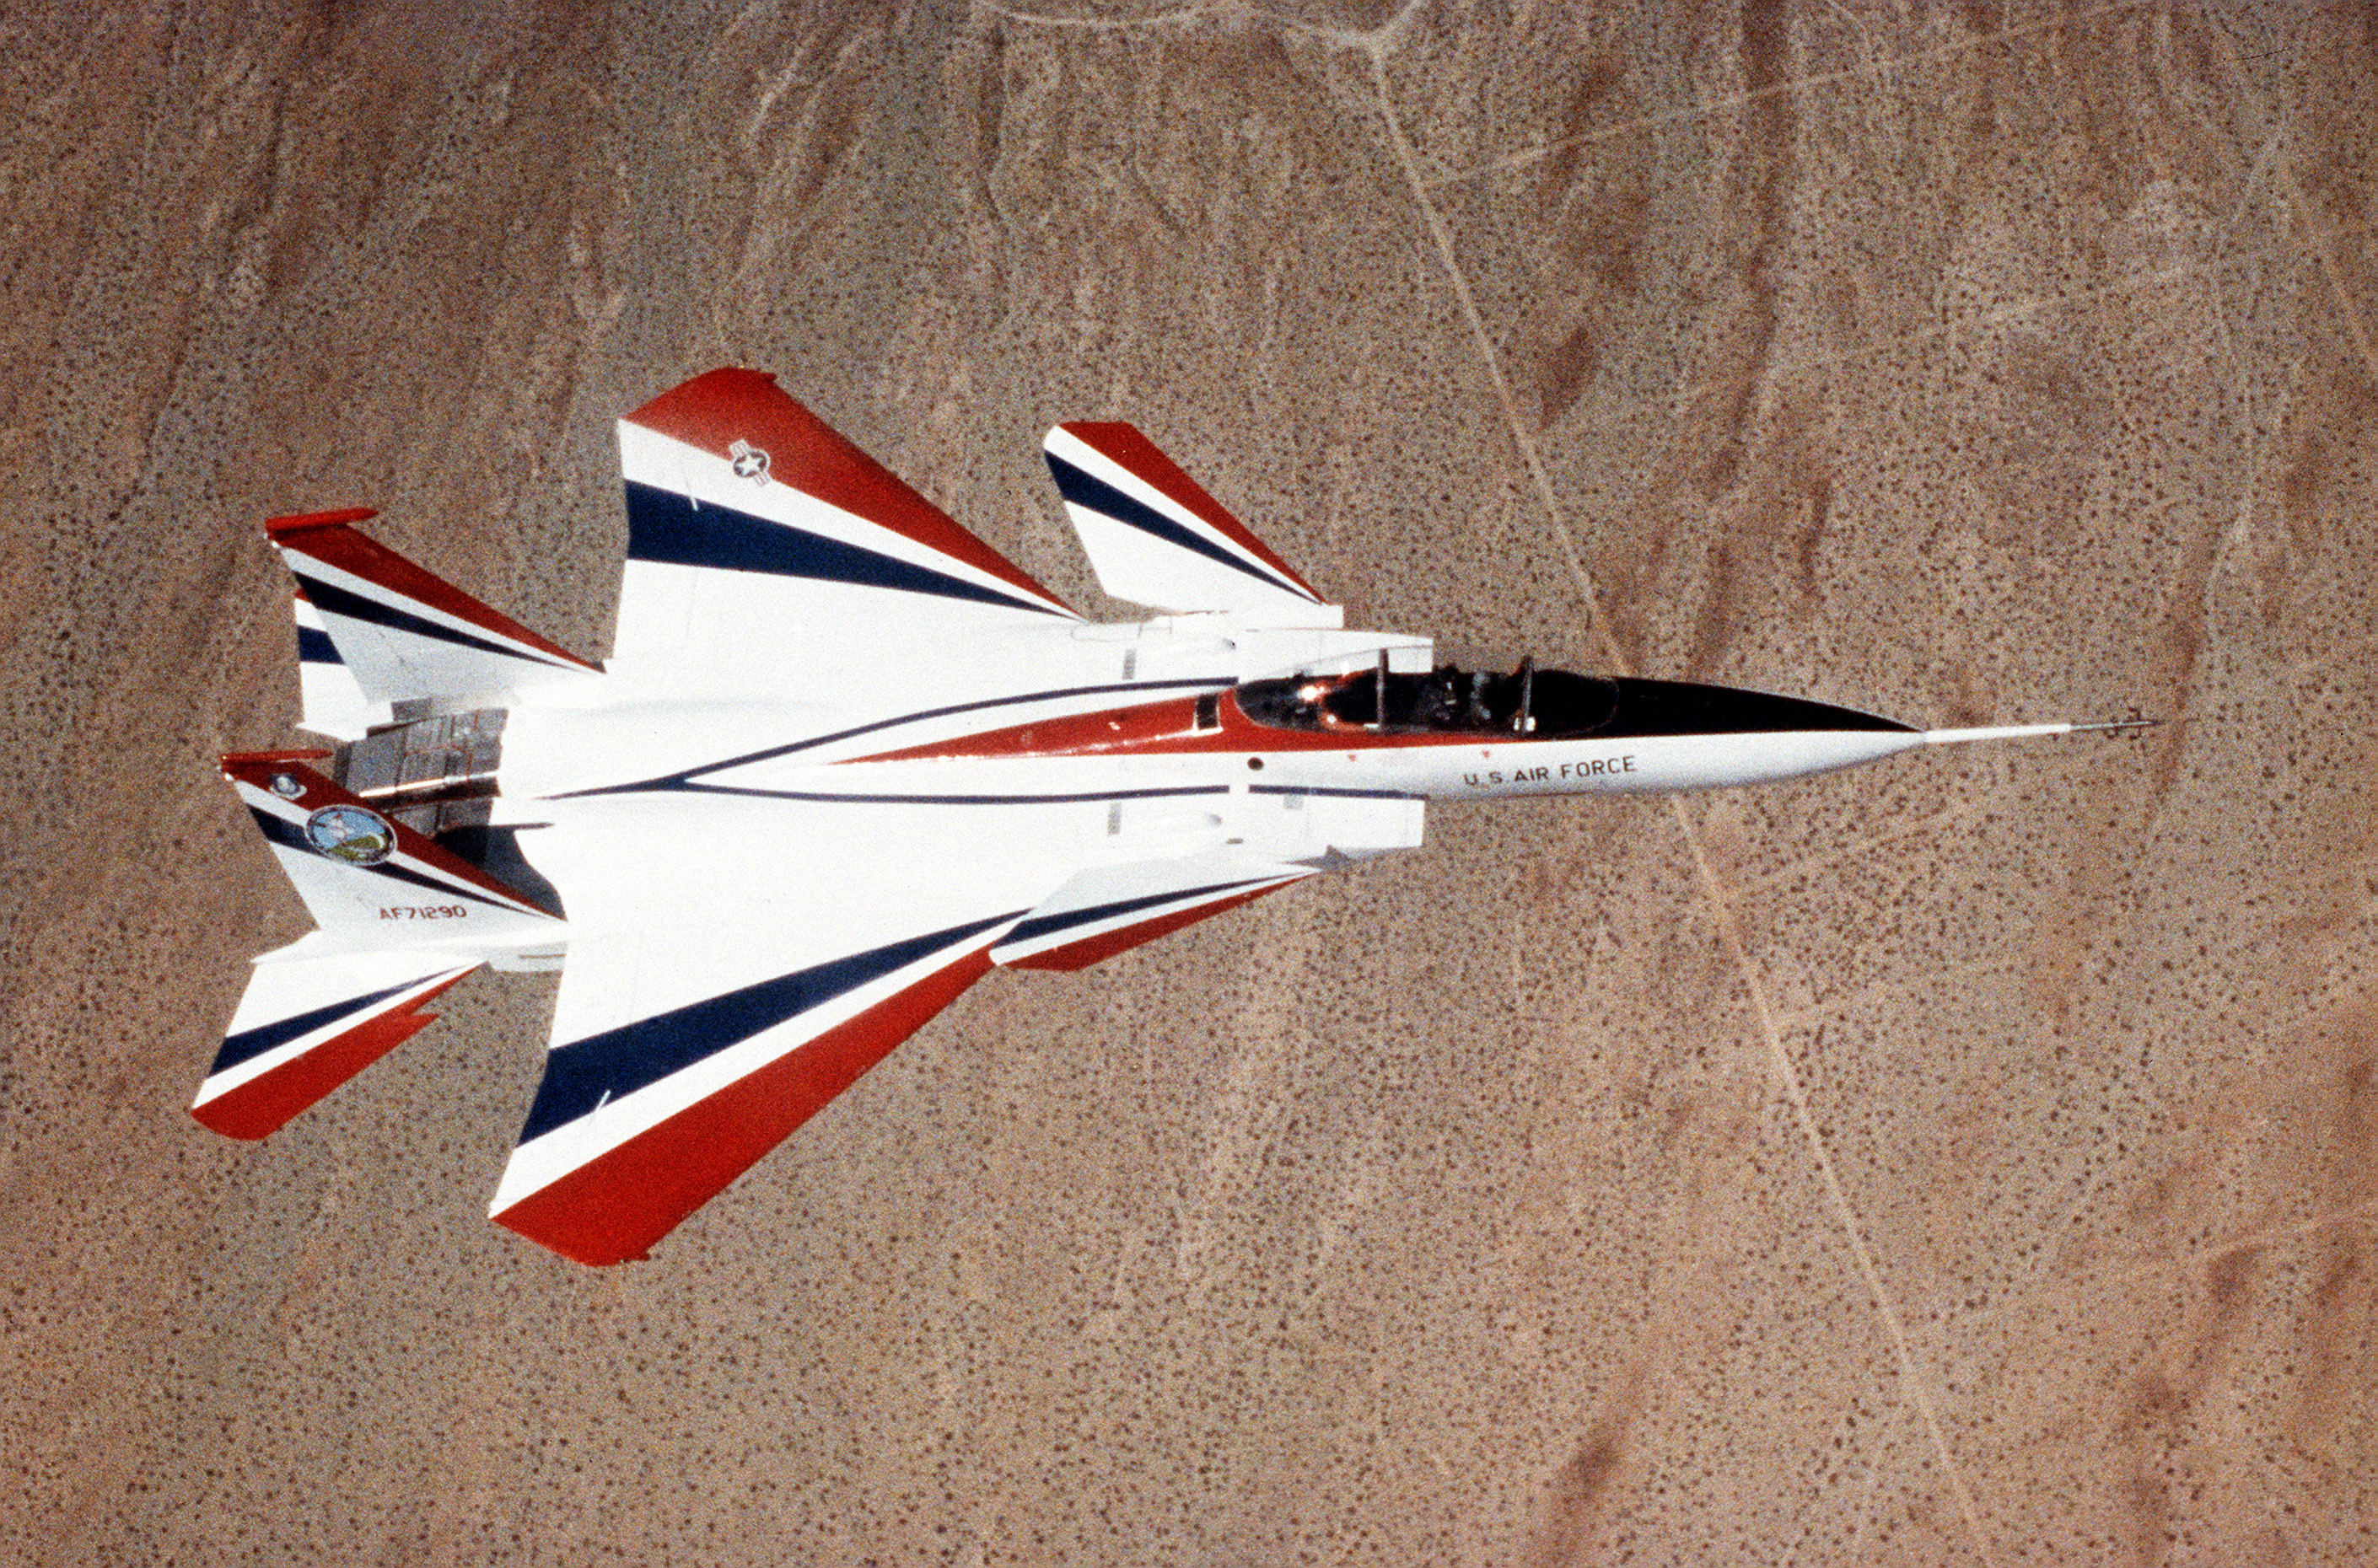 A_one-of-a-kind_F-15_Eagle_called_ACTIVE_%28Advanced_Control_Technology_for_integrated_Vehicles%29_in_flight_over_the_desert_%28viewed_from_above_the_aircraft%29%2C_will_start_test_flights_in_September_1994_DF-ST-94-01563.jpg